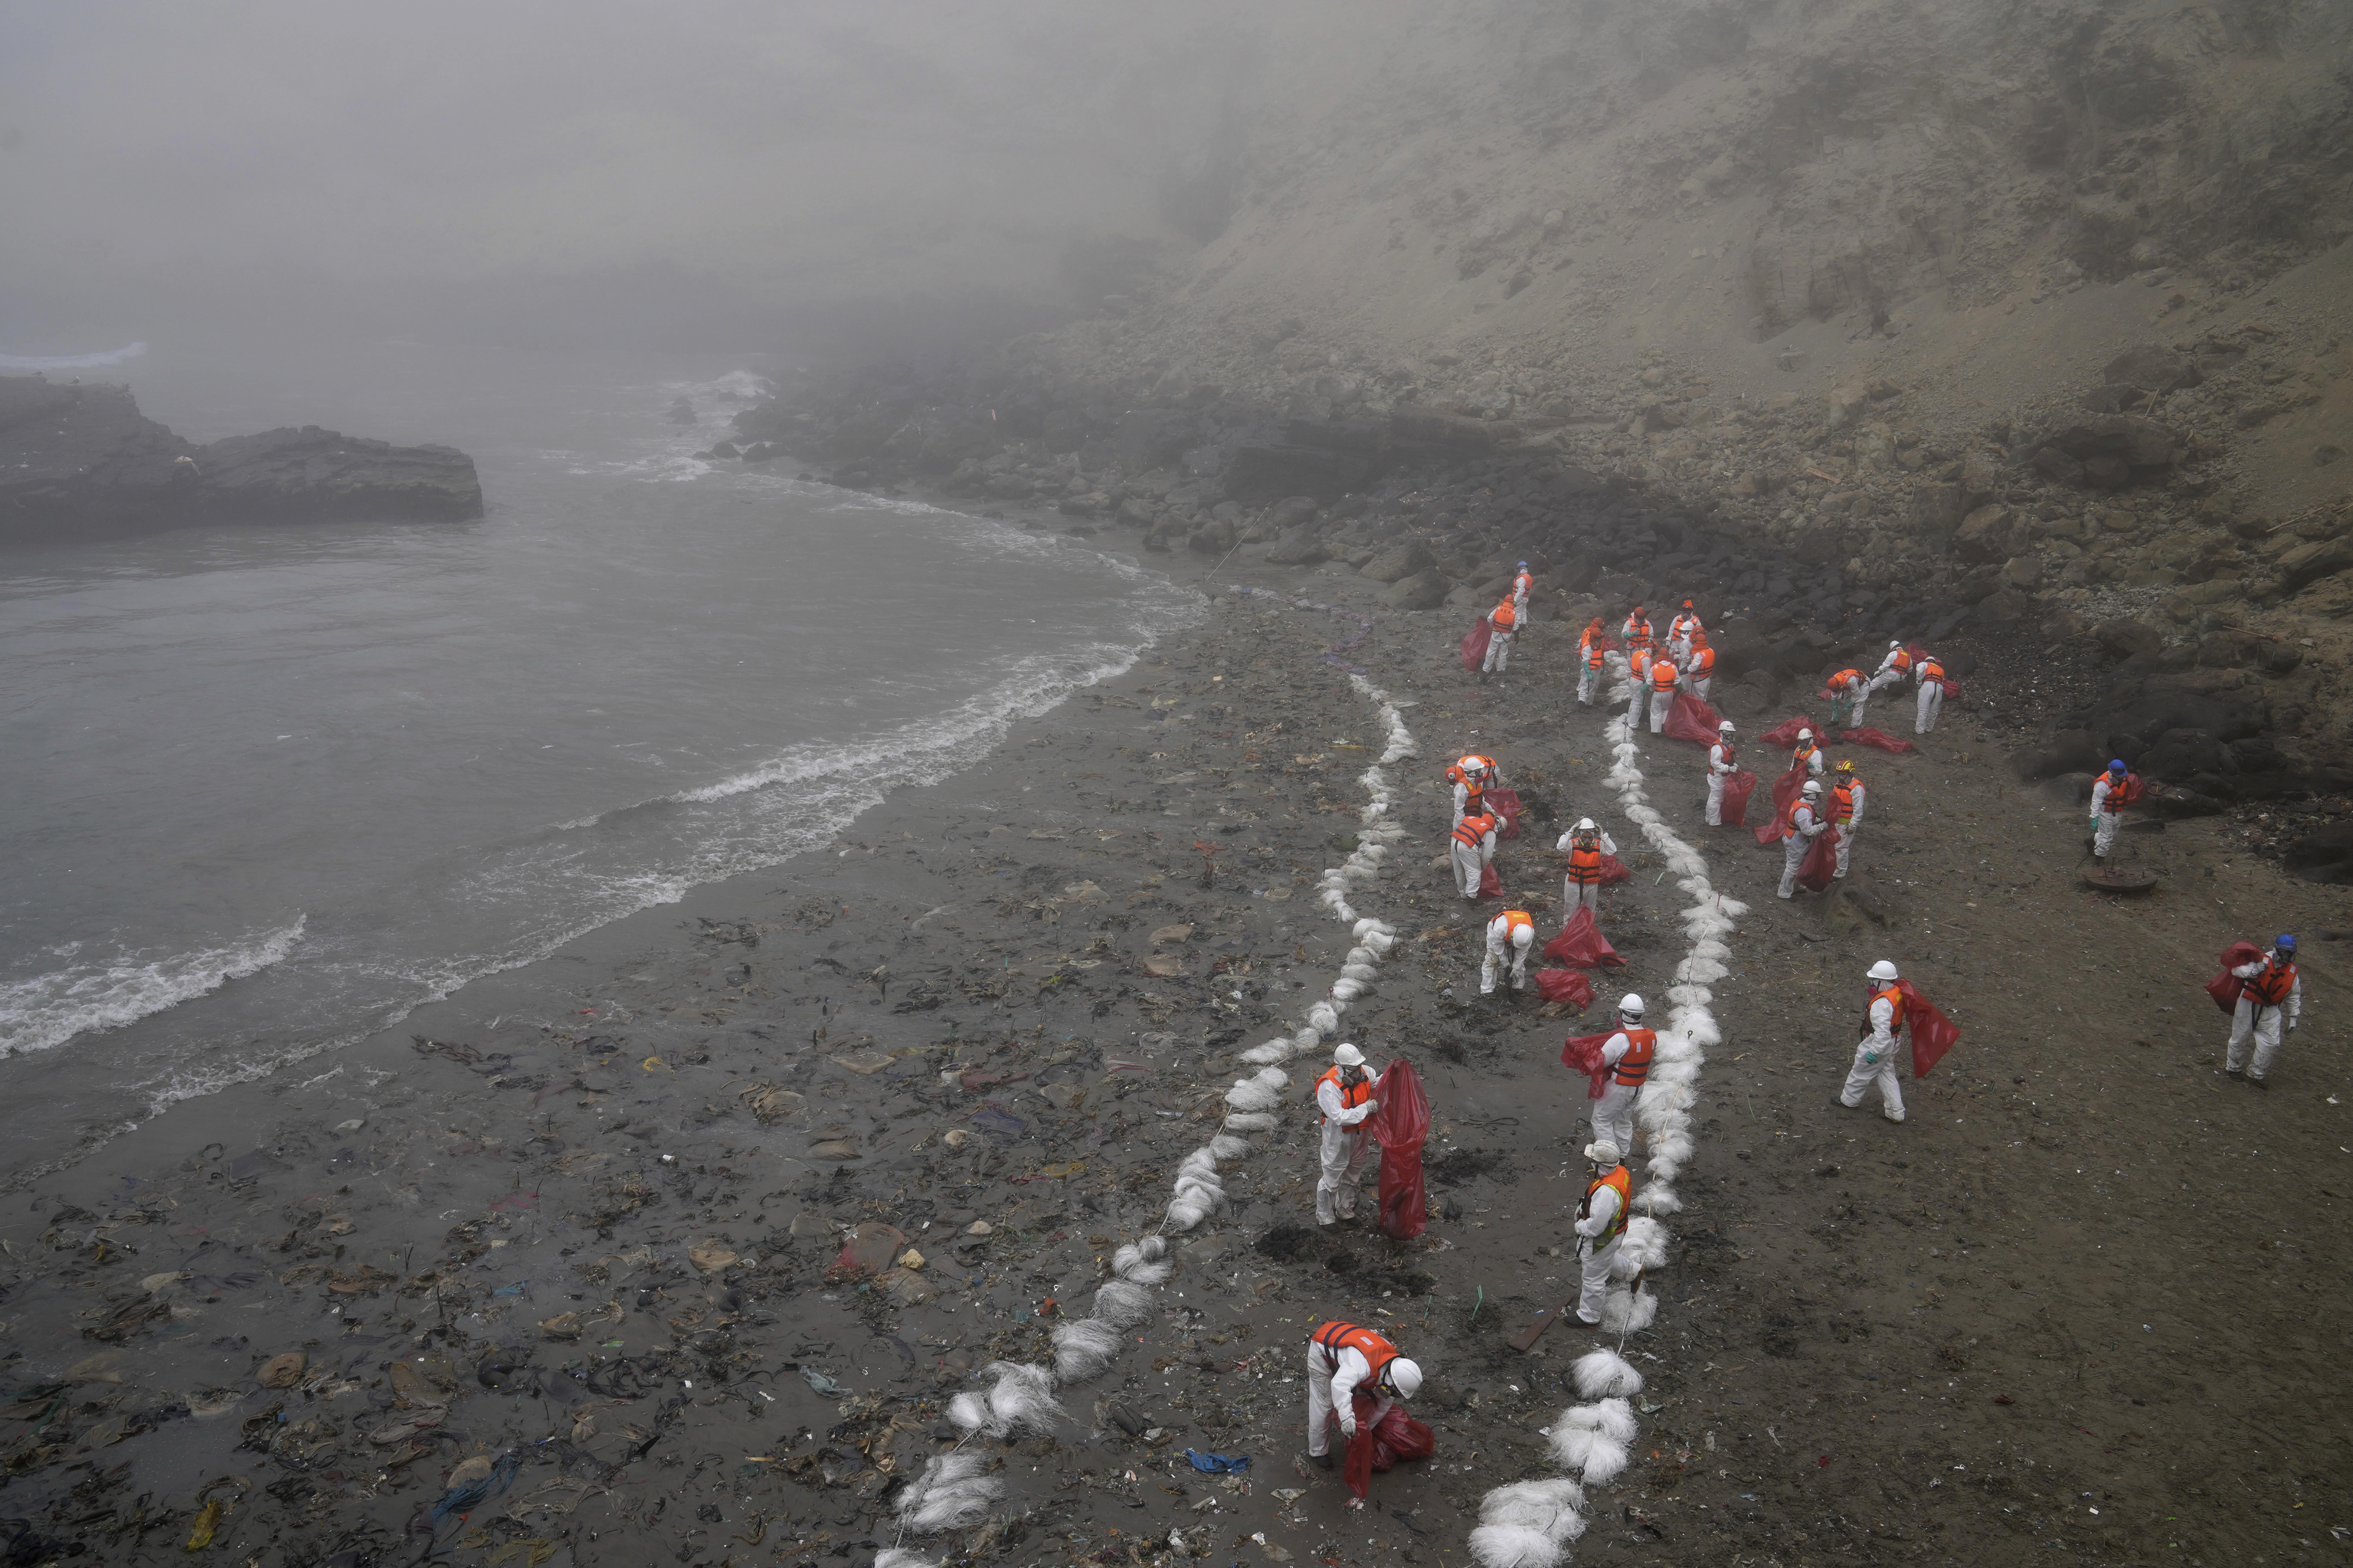 Several workers clean up Pocitos beach in Ancon, Peru.